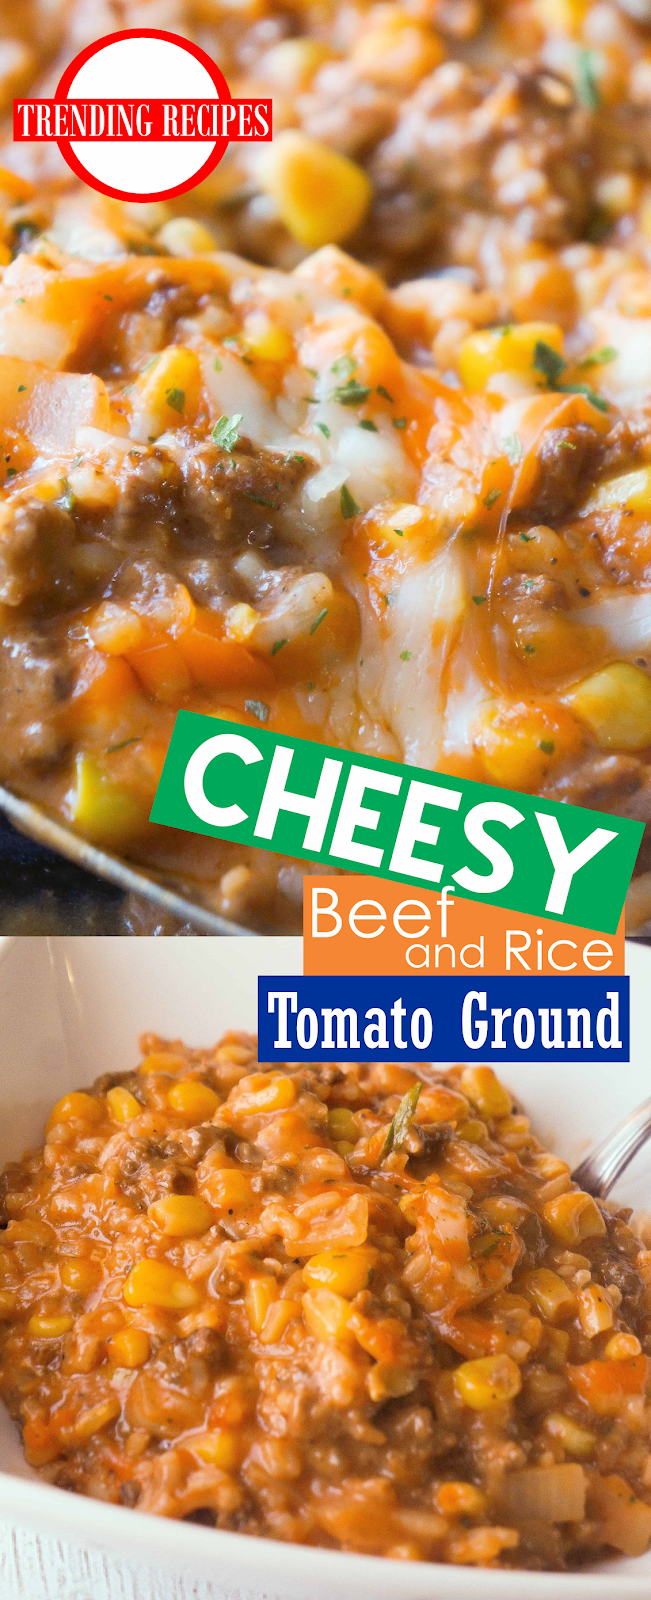 Cheesy Tomato Ground Beef and Rice | Show You Recipes